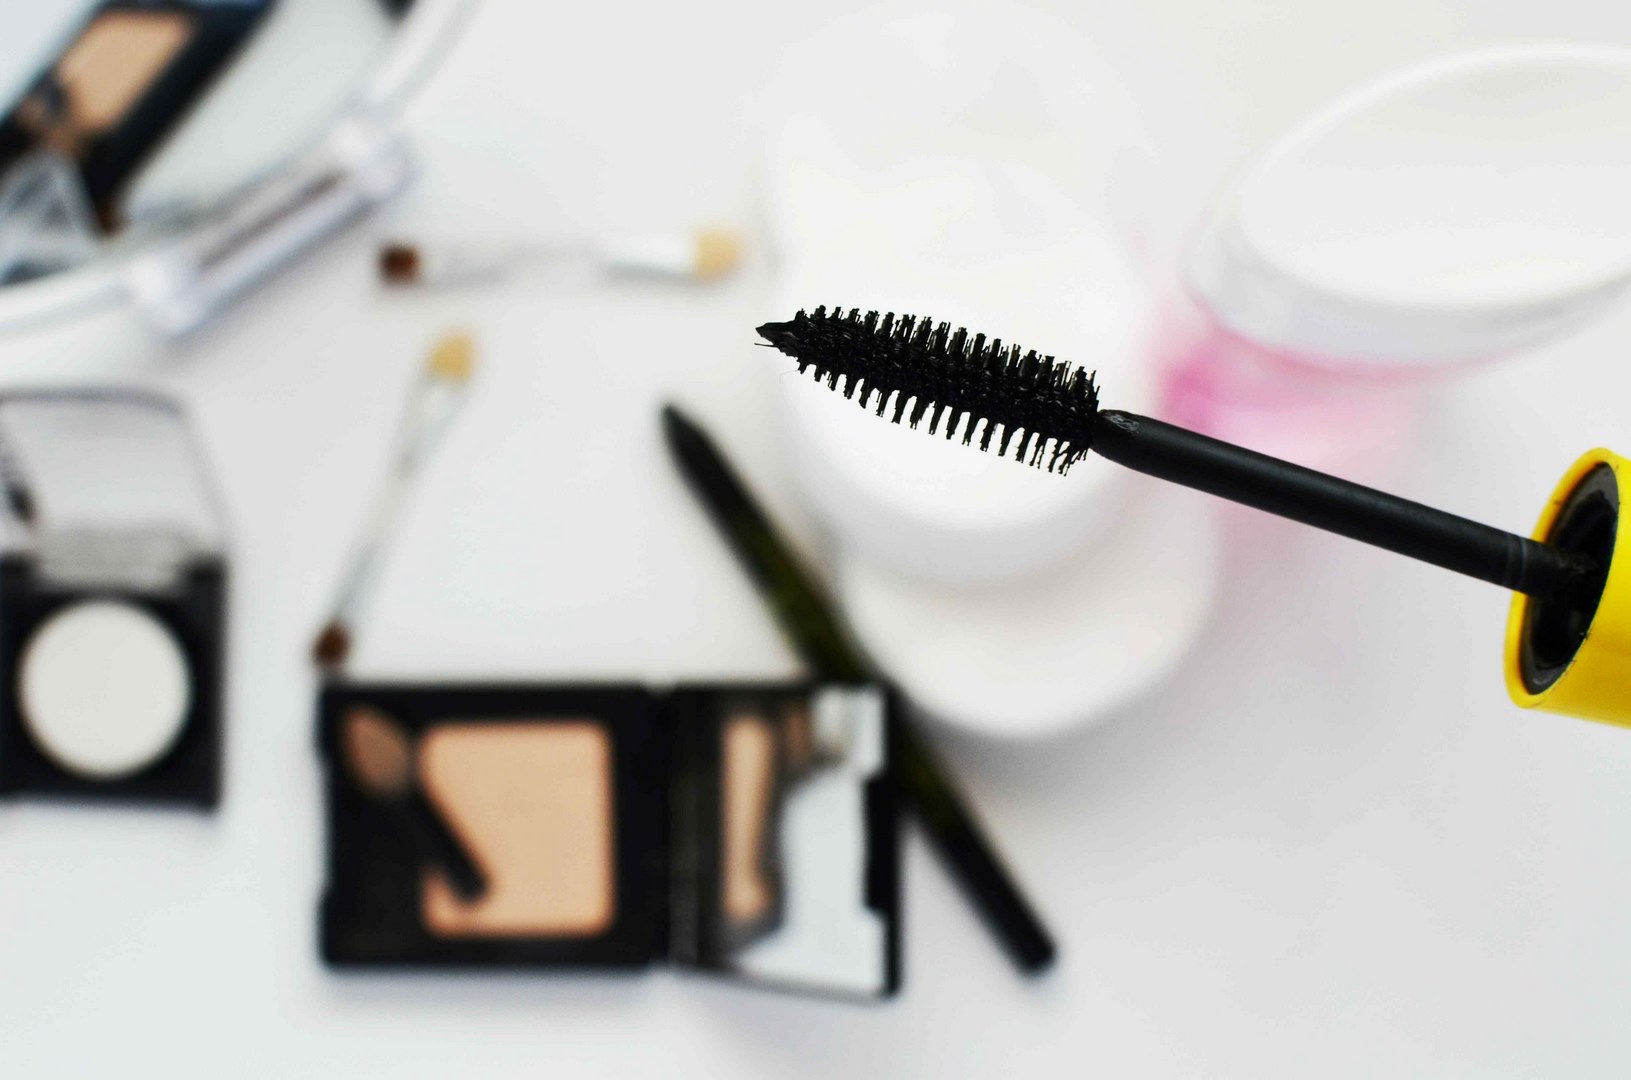 extend-the-life-of-mascara